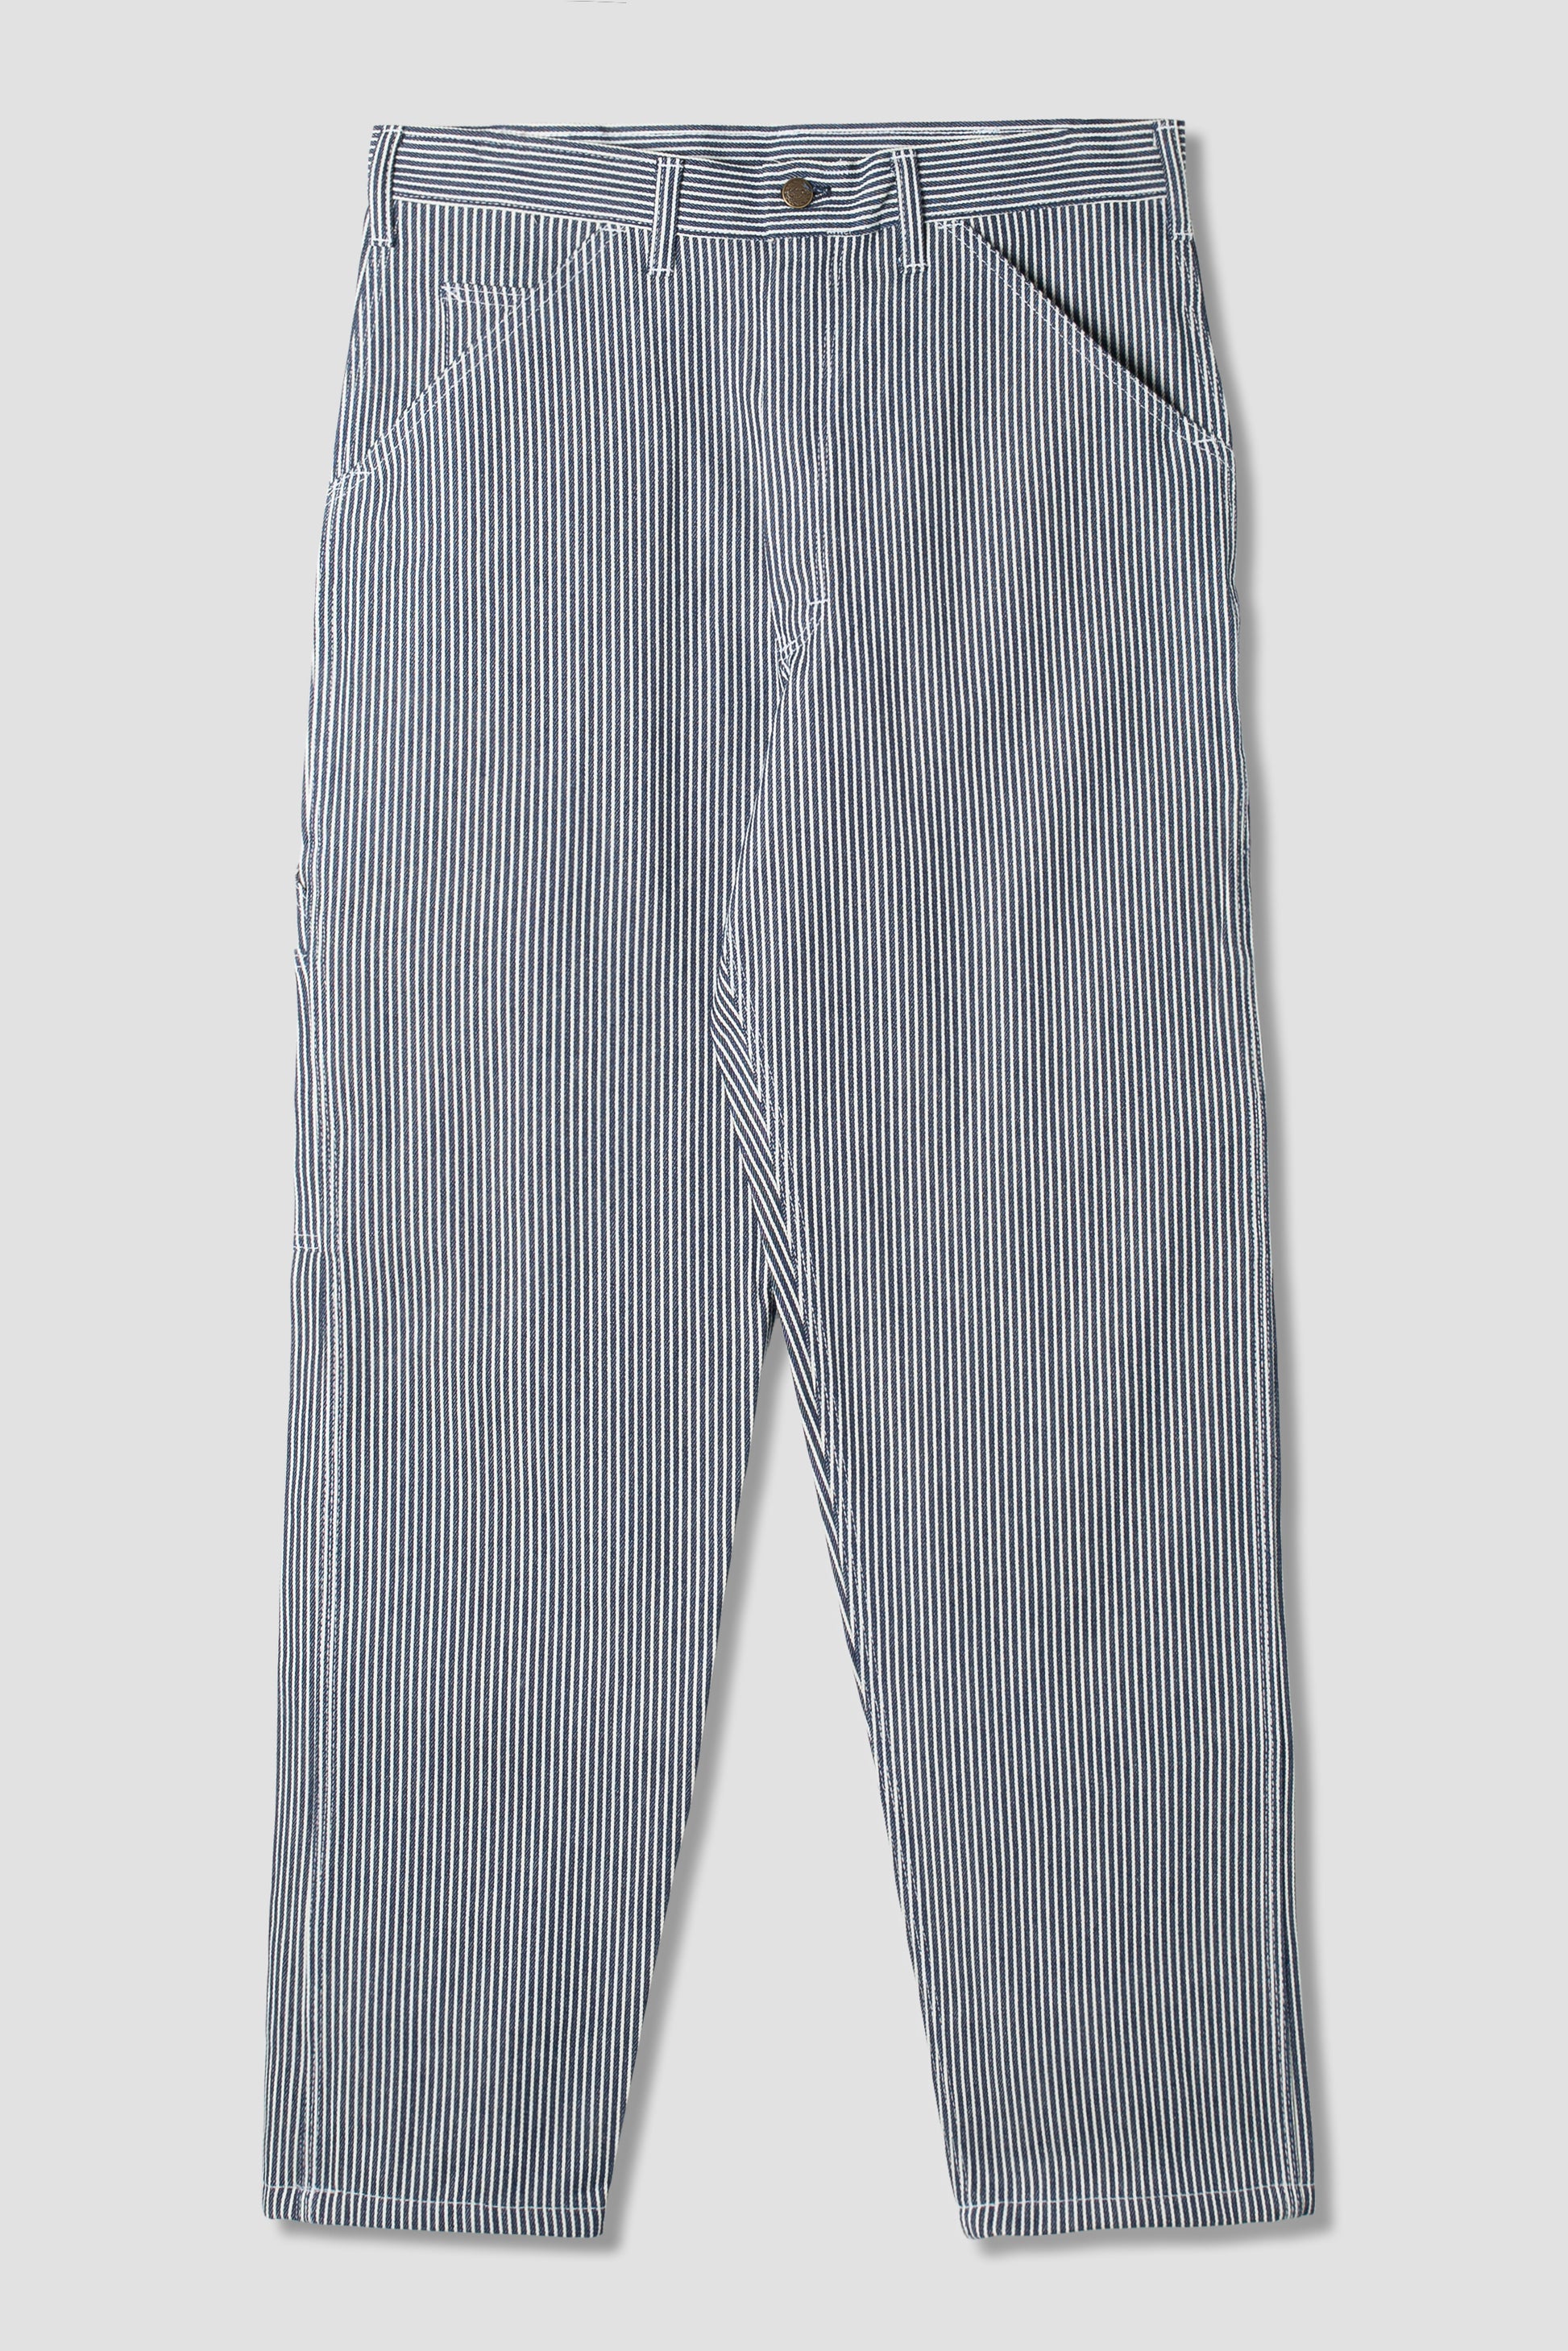 80s Painter Pant (Hickory Stripe) - Stan Ray